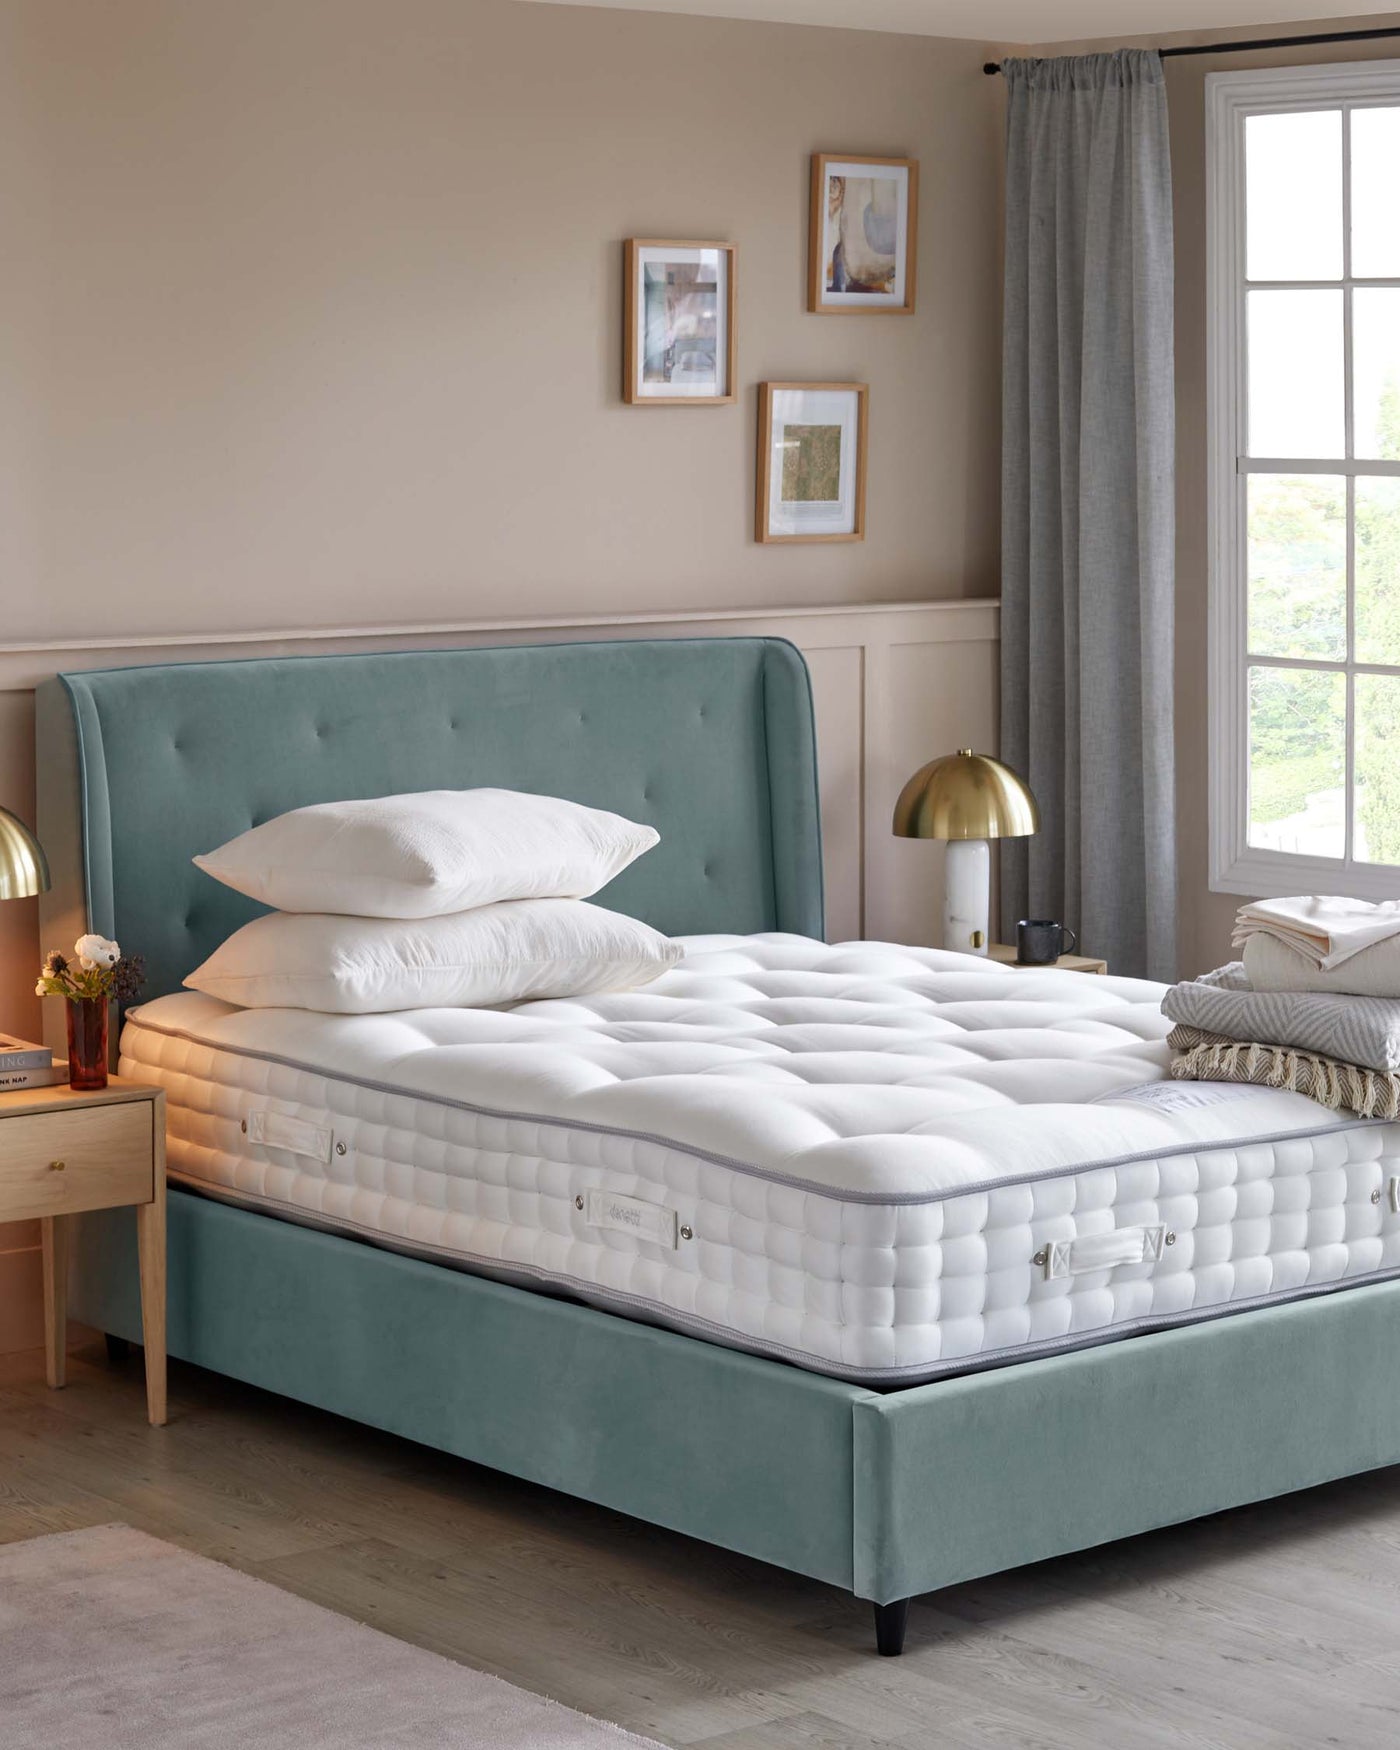 A luxurious plush teal upholstered bed with a button-tufted headboard and a thick white mattress. A light wooden bedside table with a small drawer, topped with a vase of flowers and a gold-coloured lamp, is placed to the left of the bed.